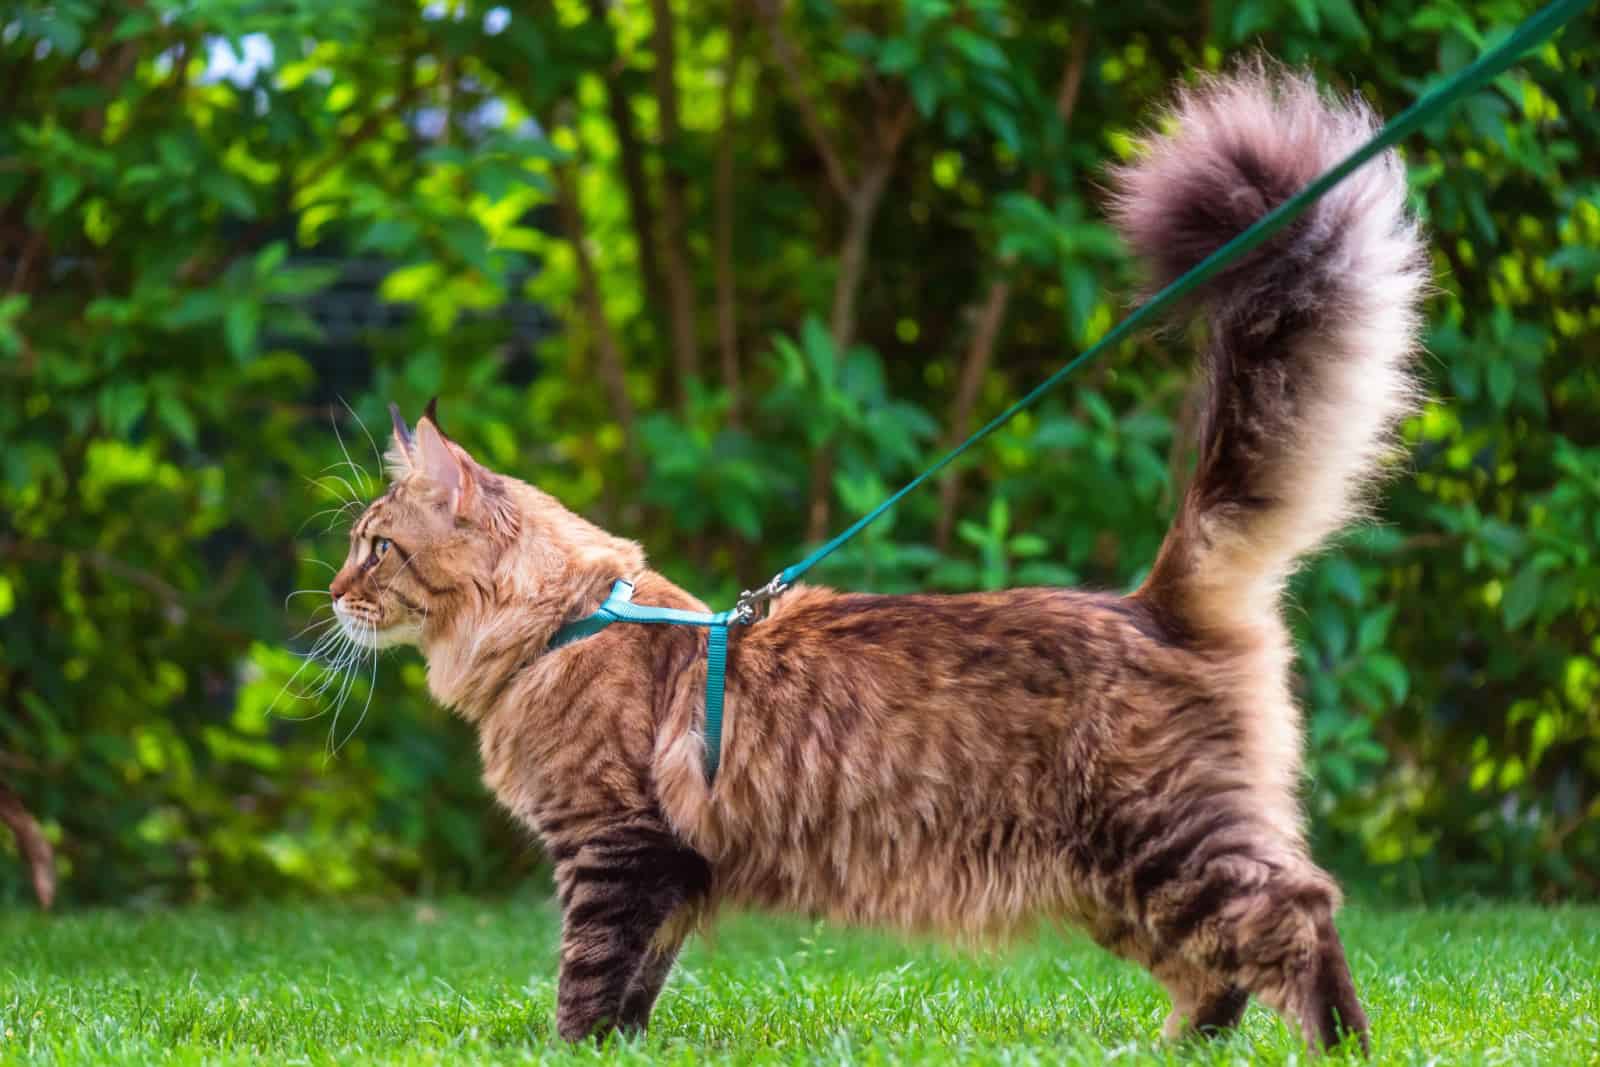 Black tabby Maine Coon cat with leash wandering in backyard